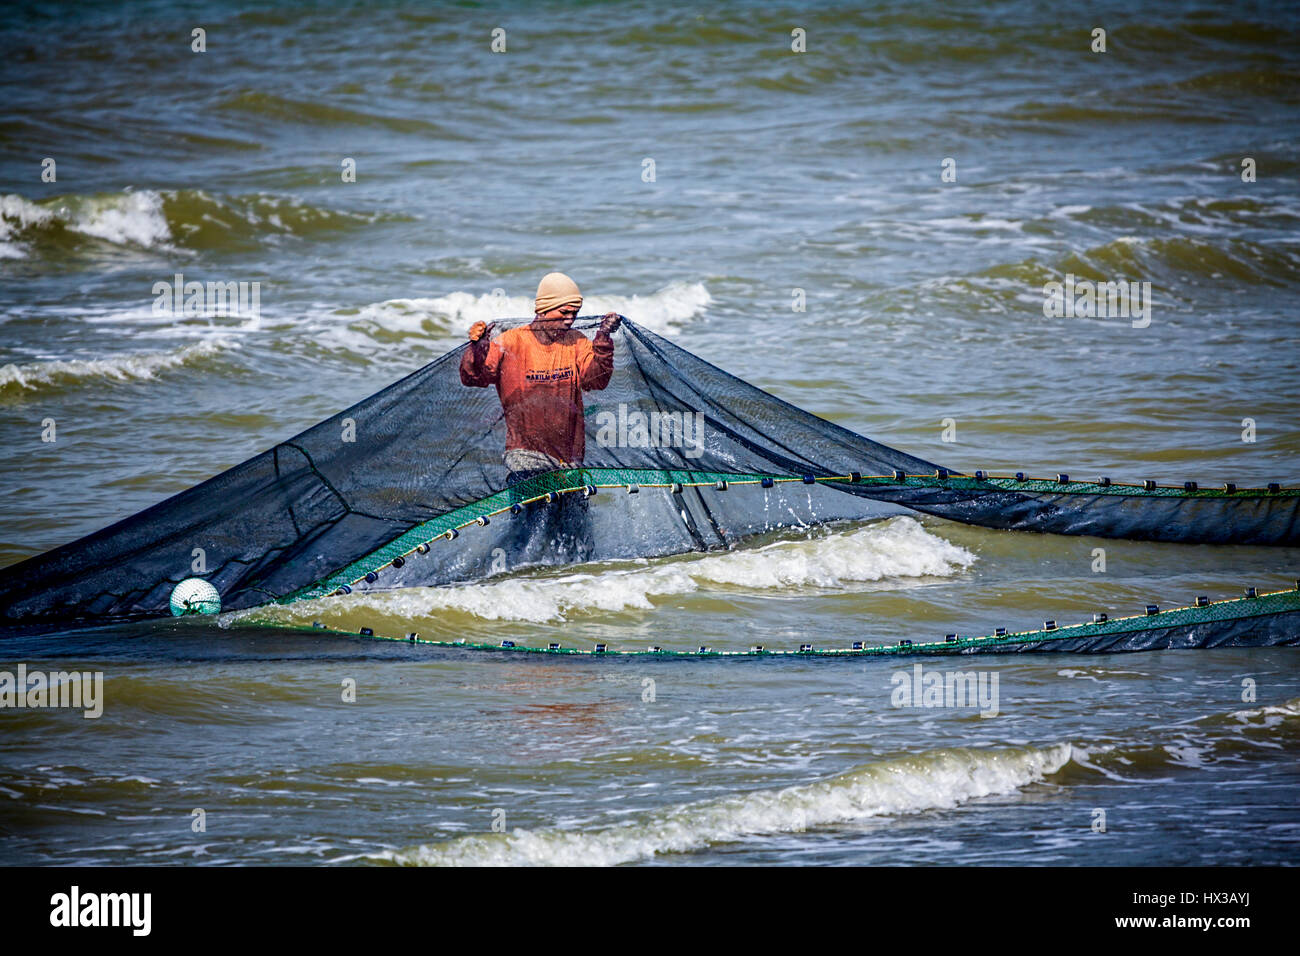 A young Filipino fisherman works with his seine net in surf close to shore at Baybay Beach, Roxas City, Panay Island, Philippines, Southeast Asia. Stock Photo